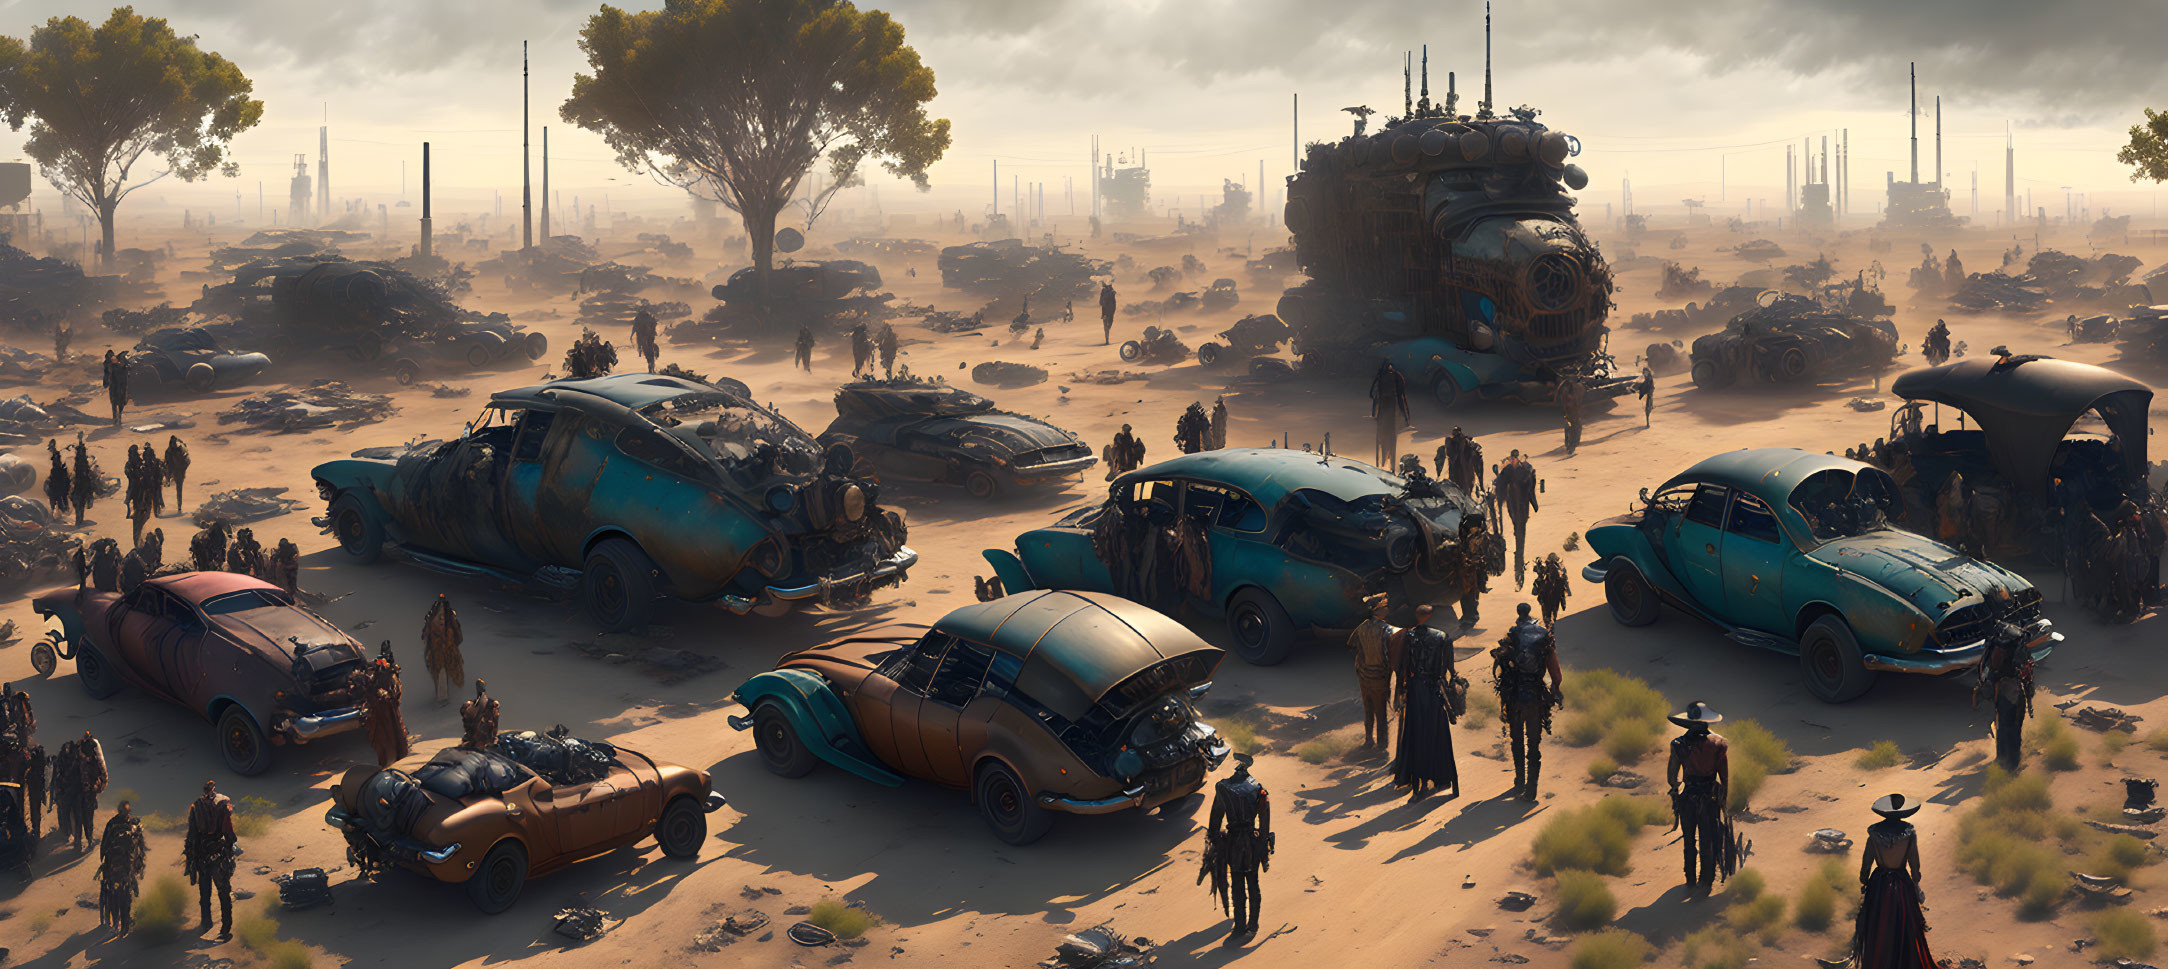 Dystopian landscape with rusting vehicles, scattered groups, and decrepit buildings